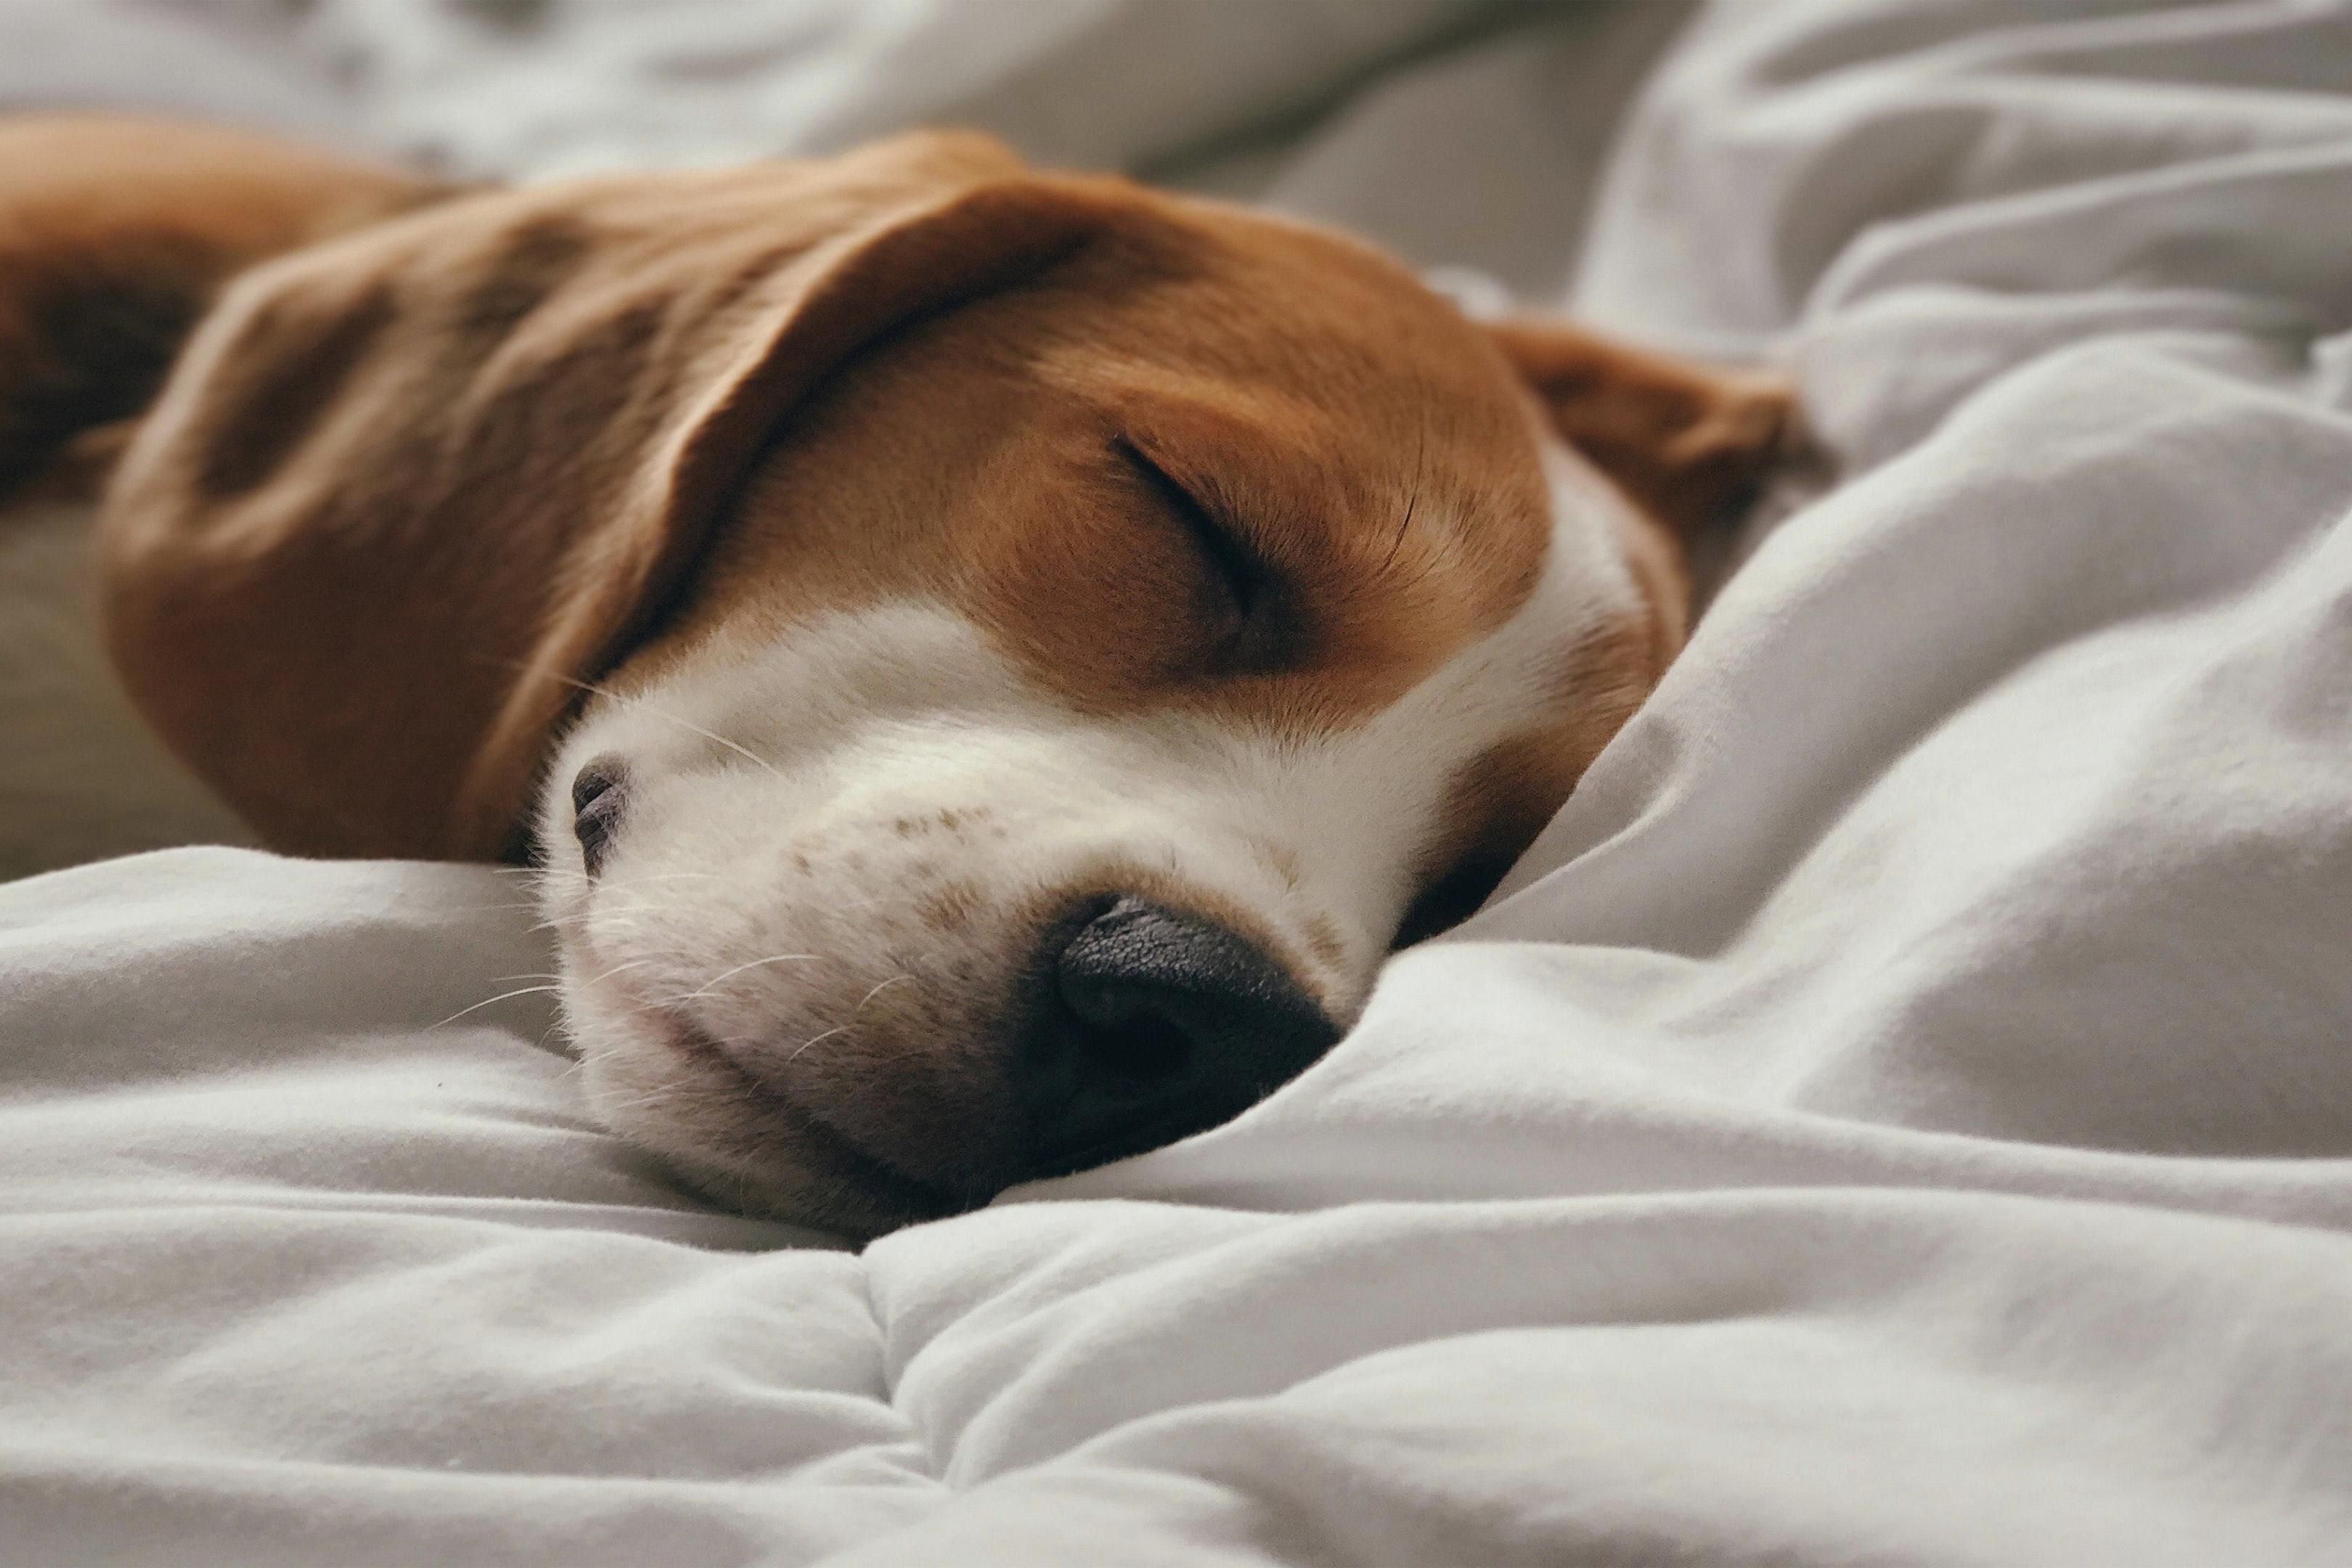 No need to leave your furry friends at home. The Staybridge Suites is pet friendly. Pet fee of $75 for stays under 6 nights or $150 for stays over 7 nights. Our hotel features a pet walking area.